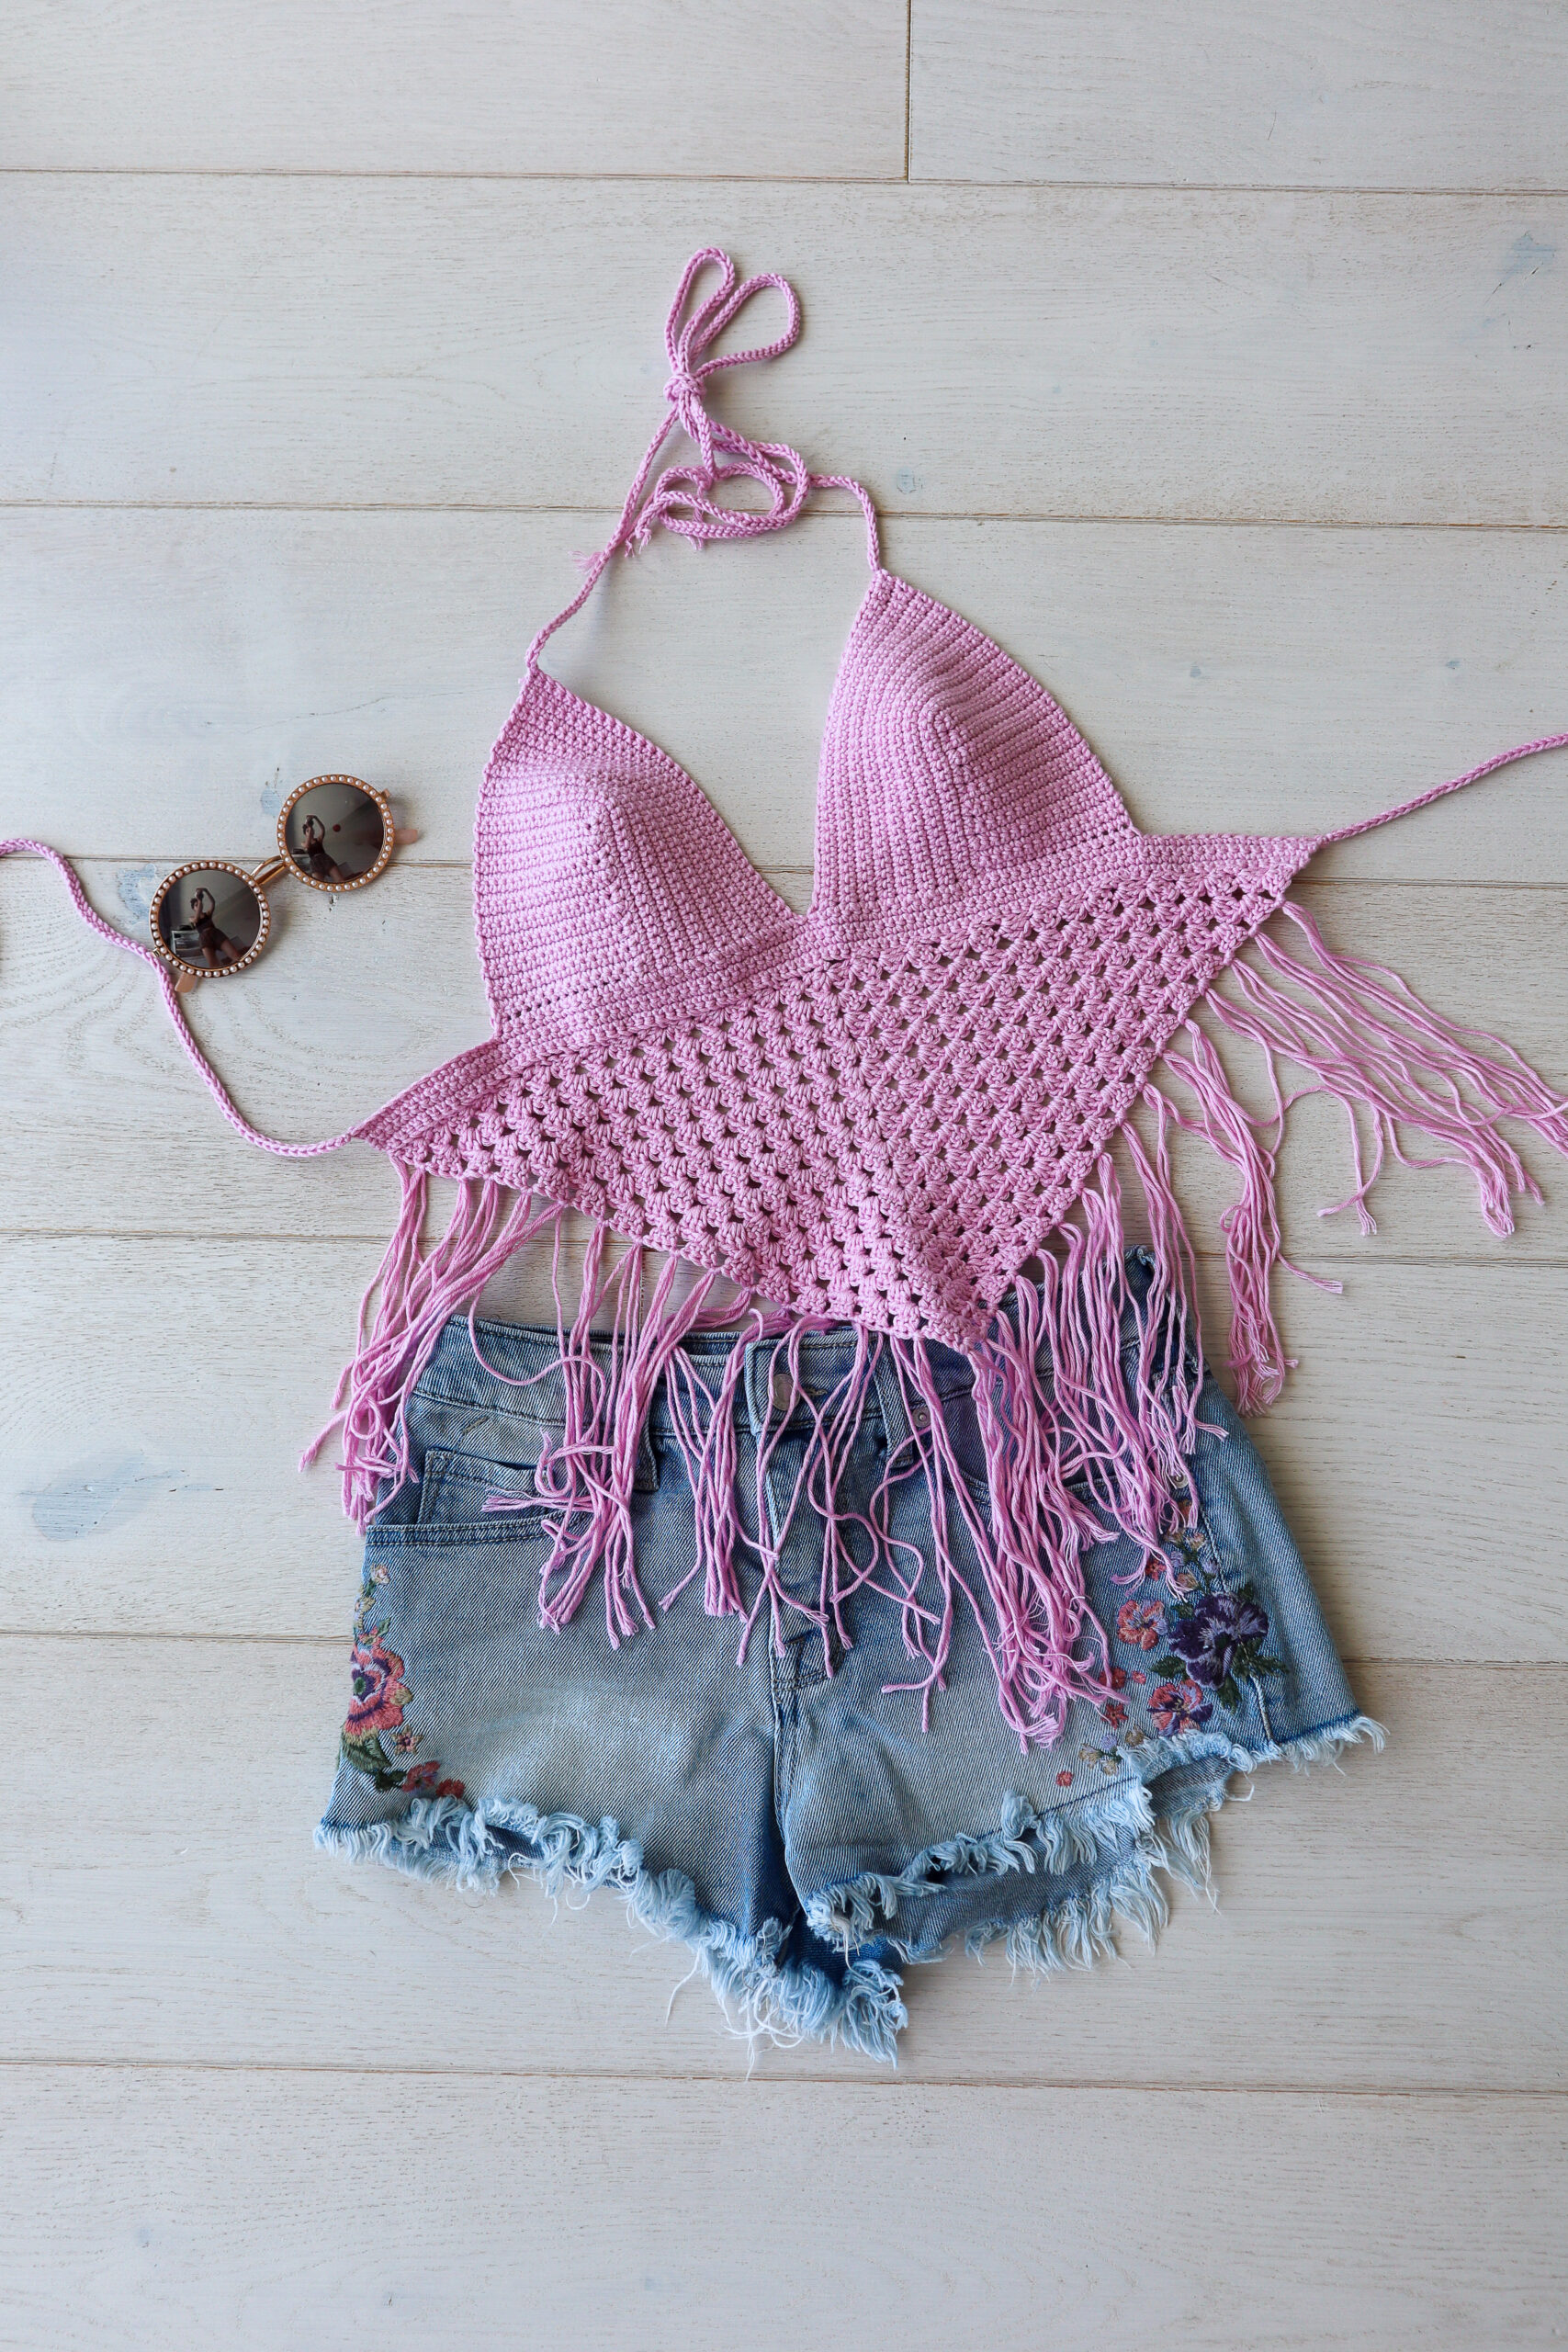 Crochet One Bralette And Get Two Fun Styles